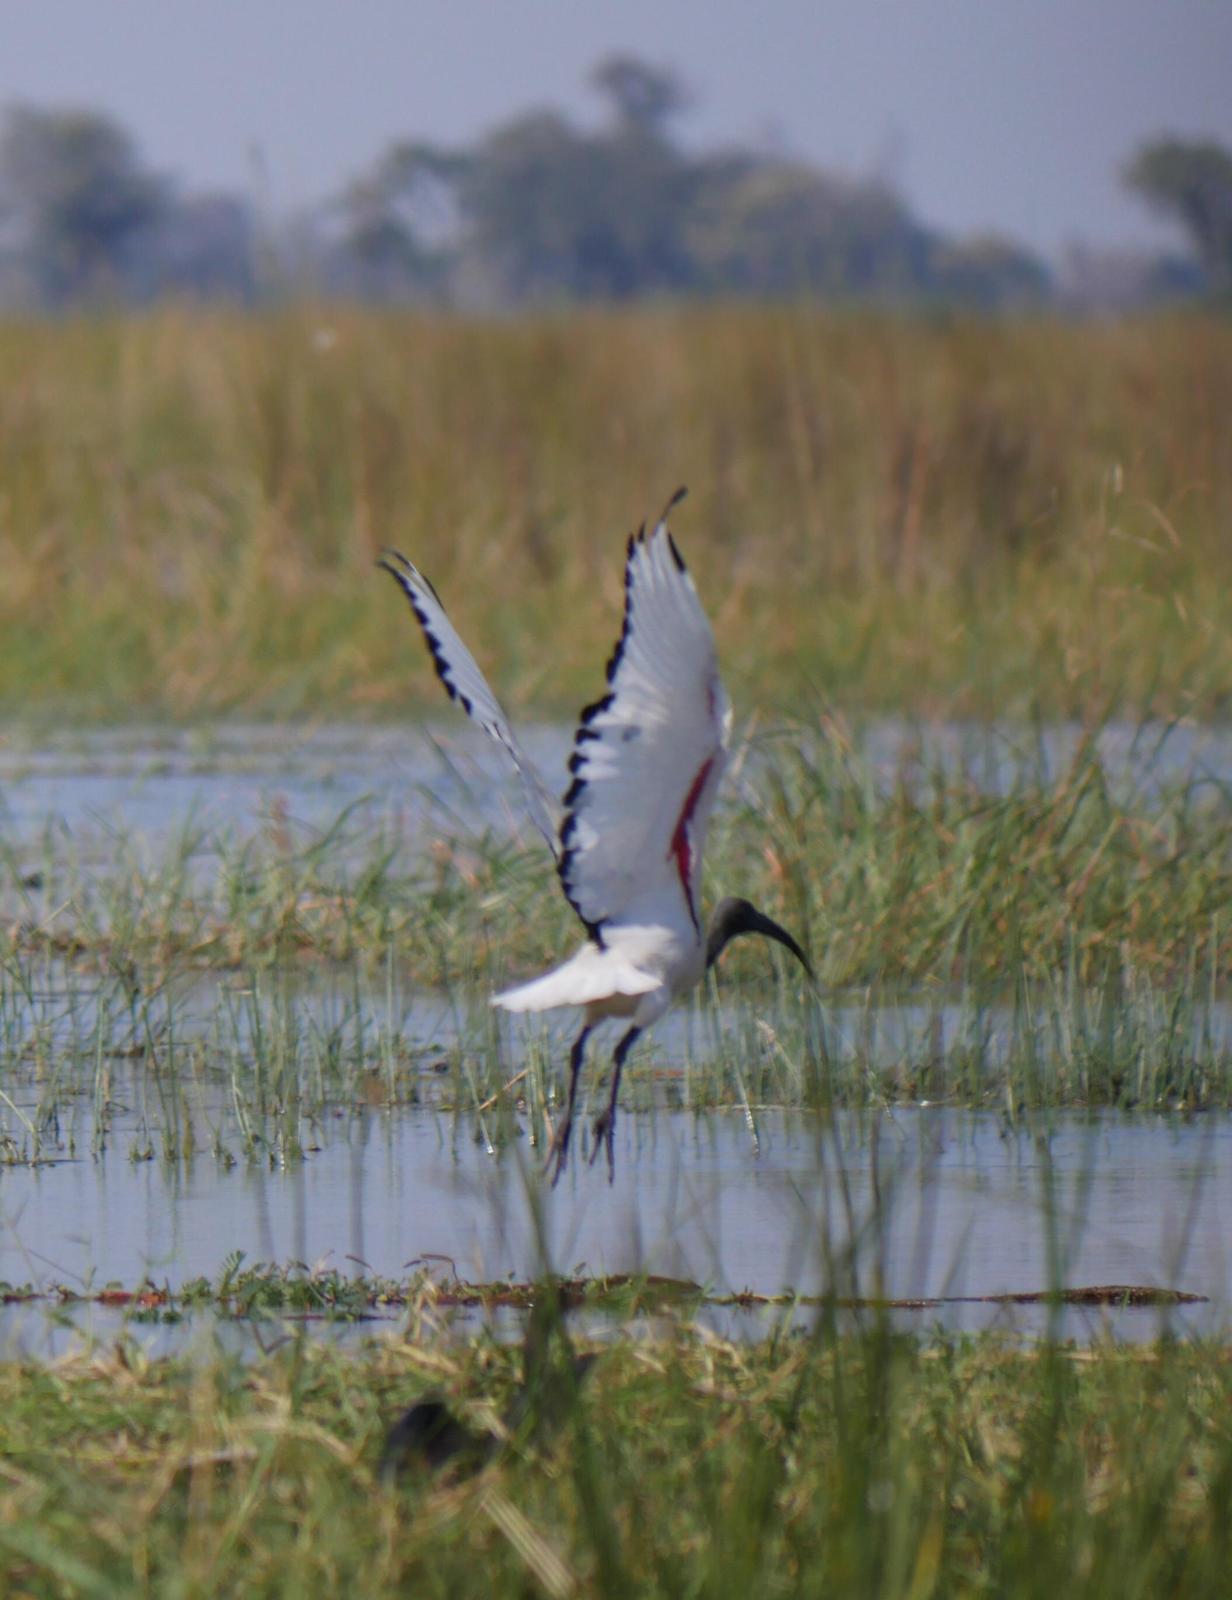 African Sacred Ibis Photo by Peter Lowe